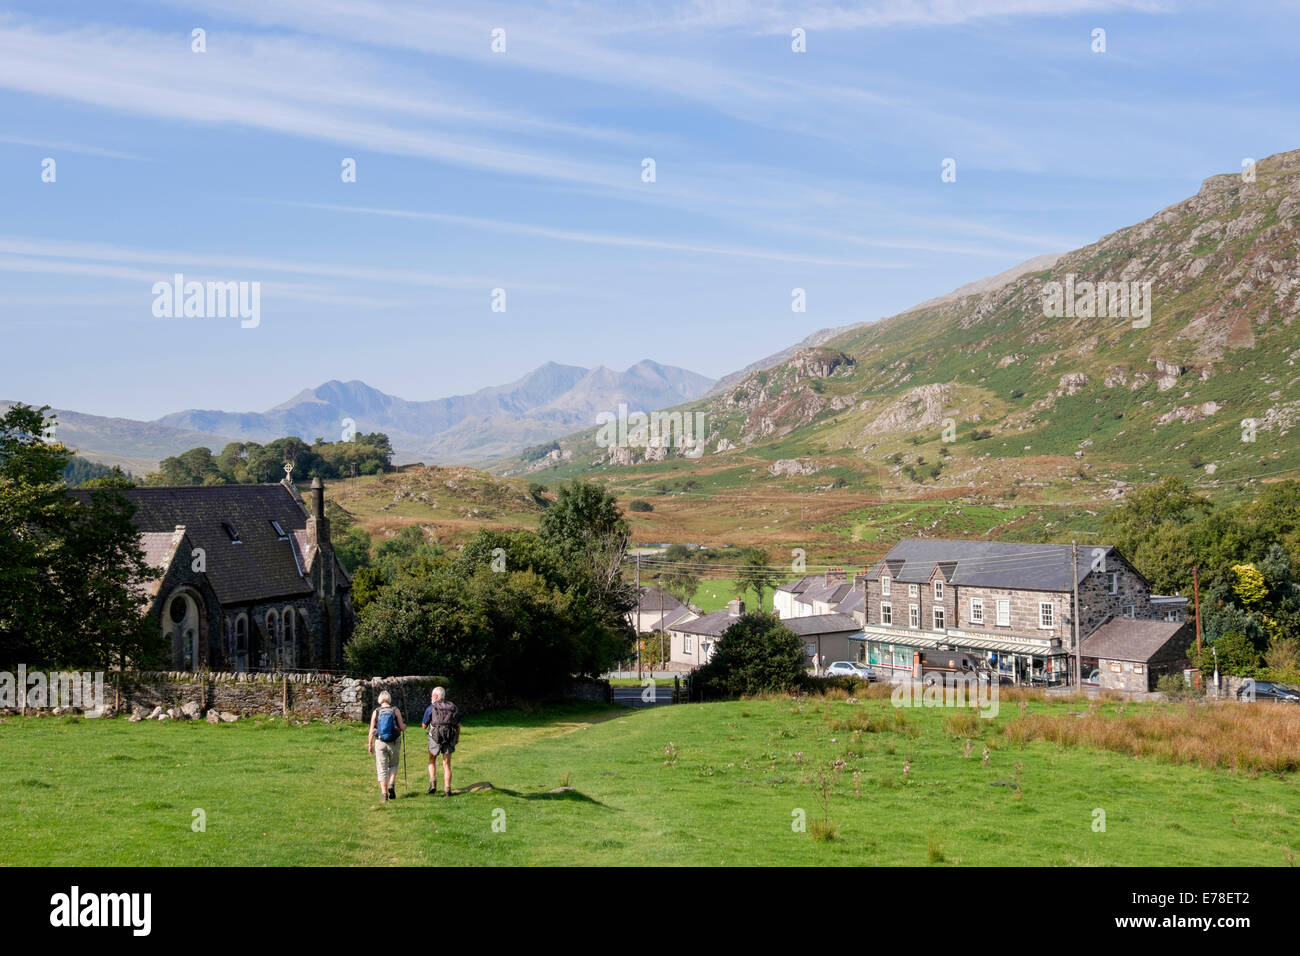 View to the rural village with two walkers walking down the hillside In Snowdonia National Park. Capel Curig, Conwy, North Wales, UK, Britain Stock Photo